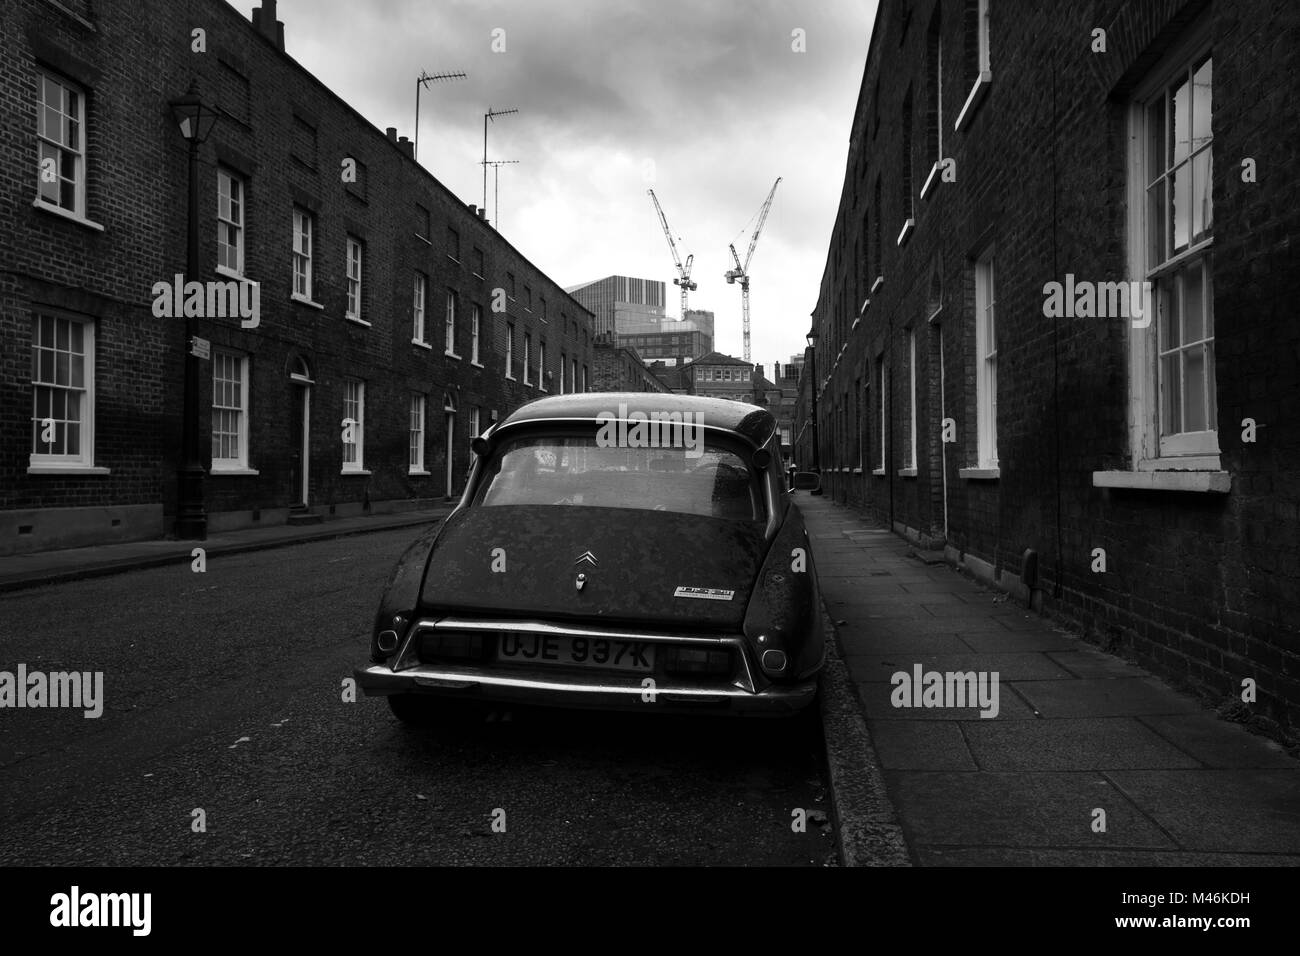 South east london Black and White Stock Photos & Images - Alamy